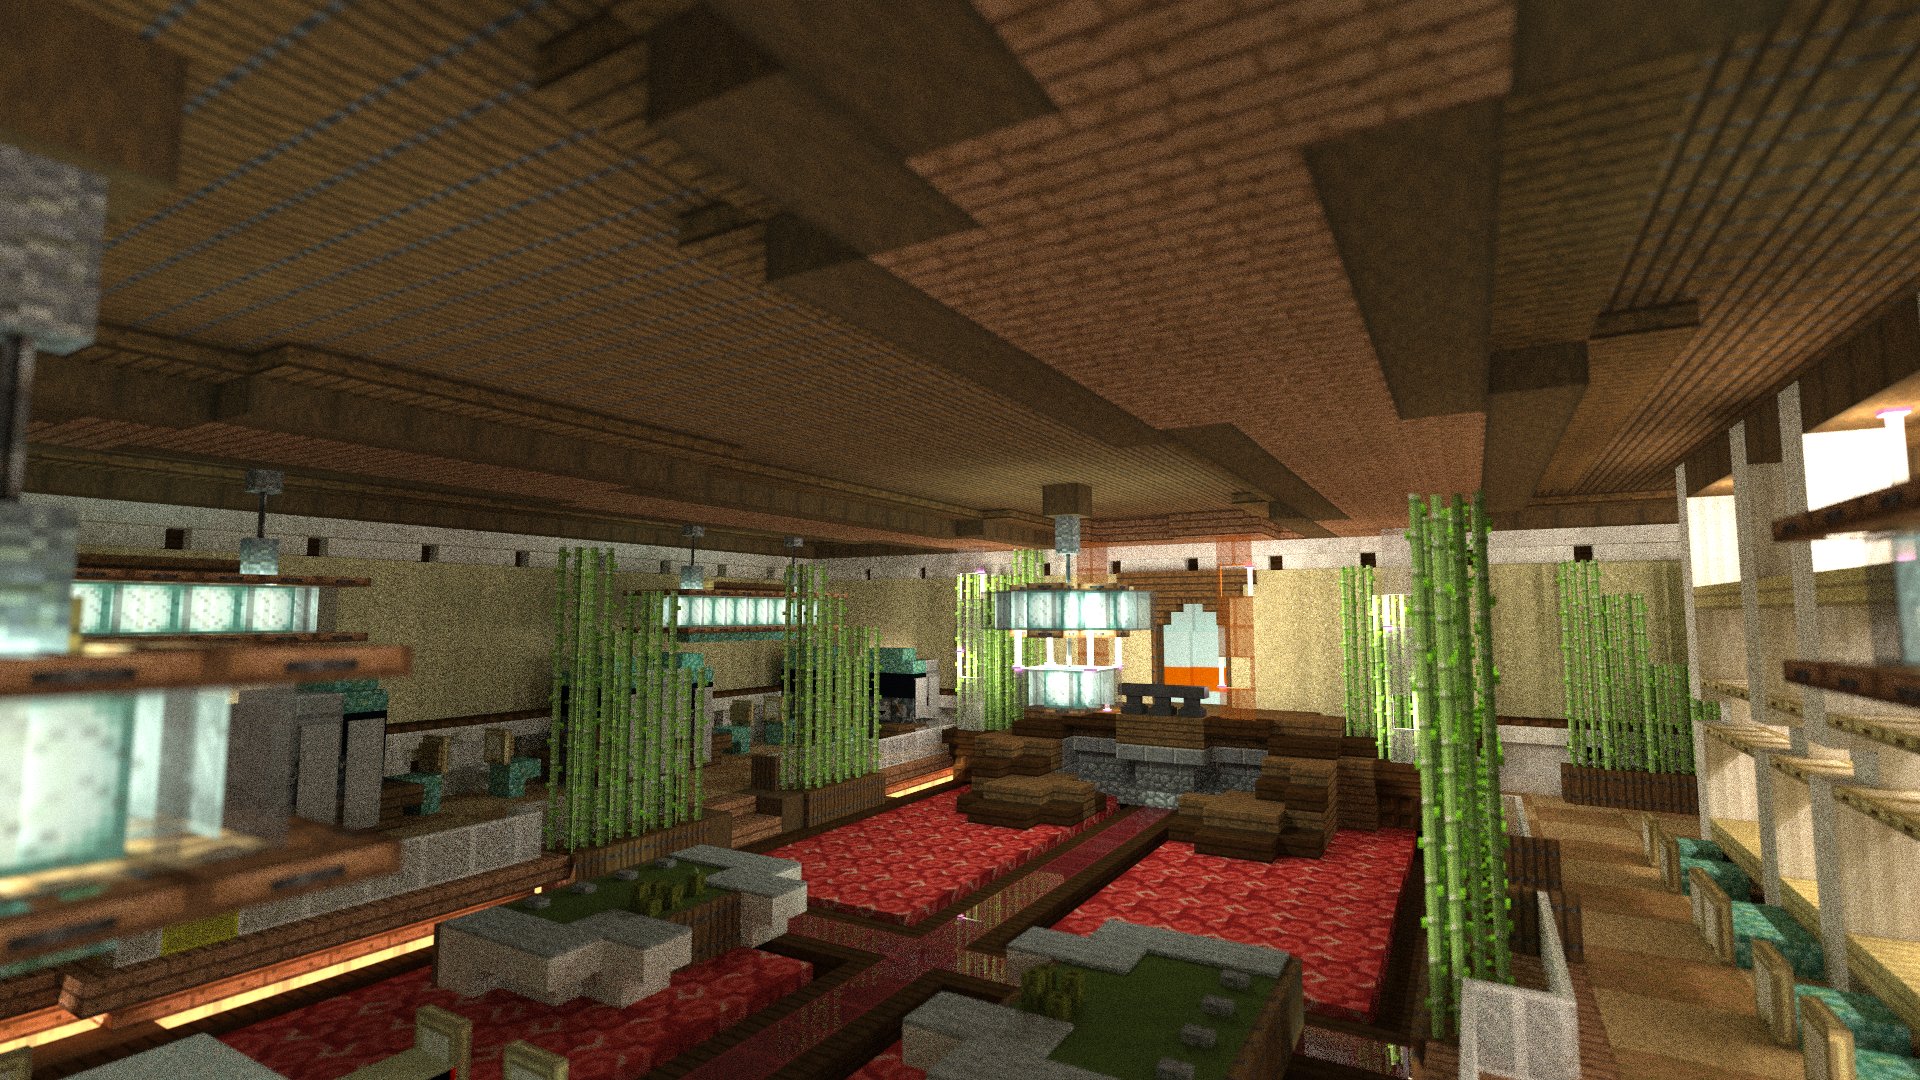 Lothiredon 在 Twitter 上 Casino Interior Just Another 231 Rooms To Go Jokes Aside The Sugar Cane Is Supposed To Be Bamboo But We Can T Render It Minecraft Minecraft坂道コンテスト T Co Prwkfducga